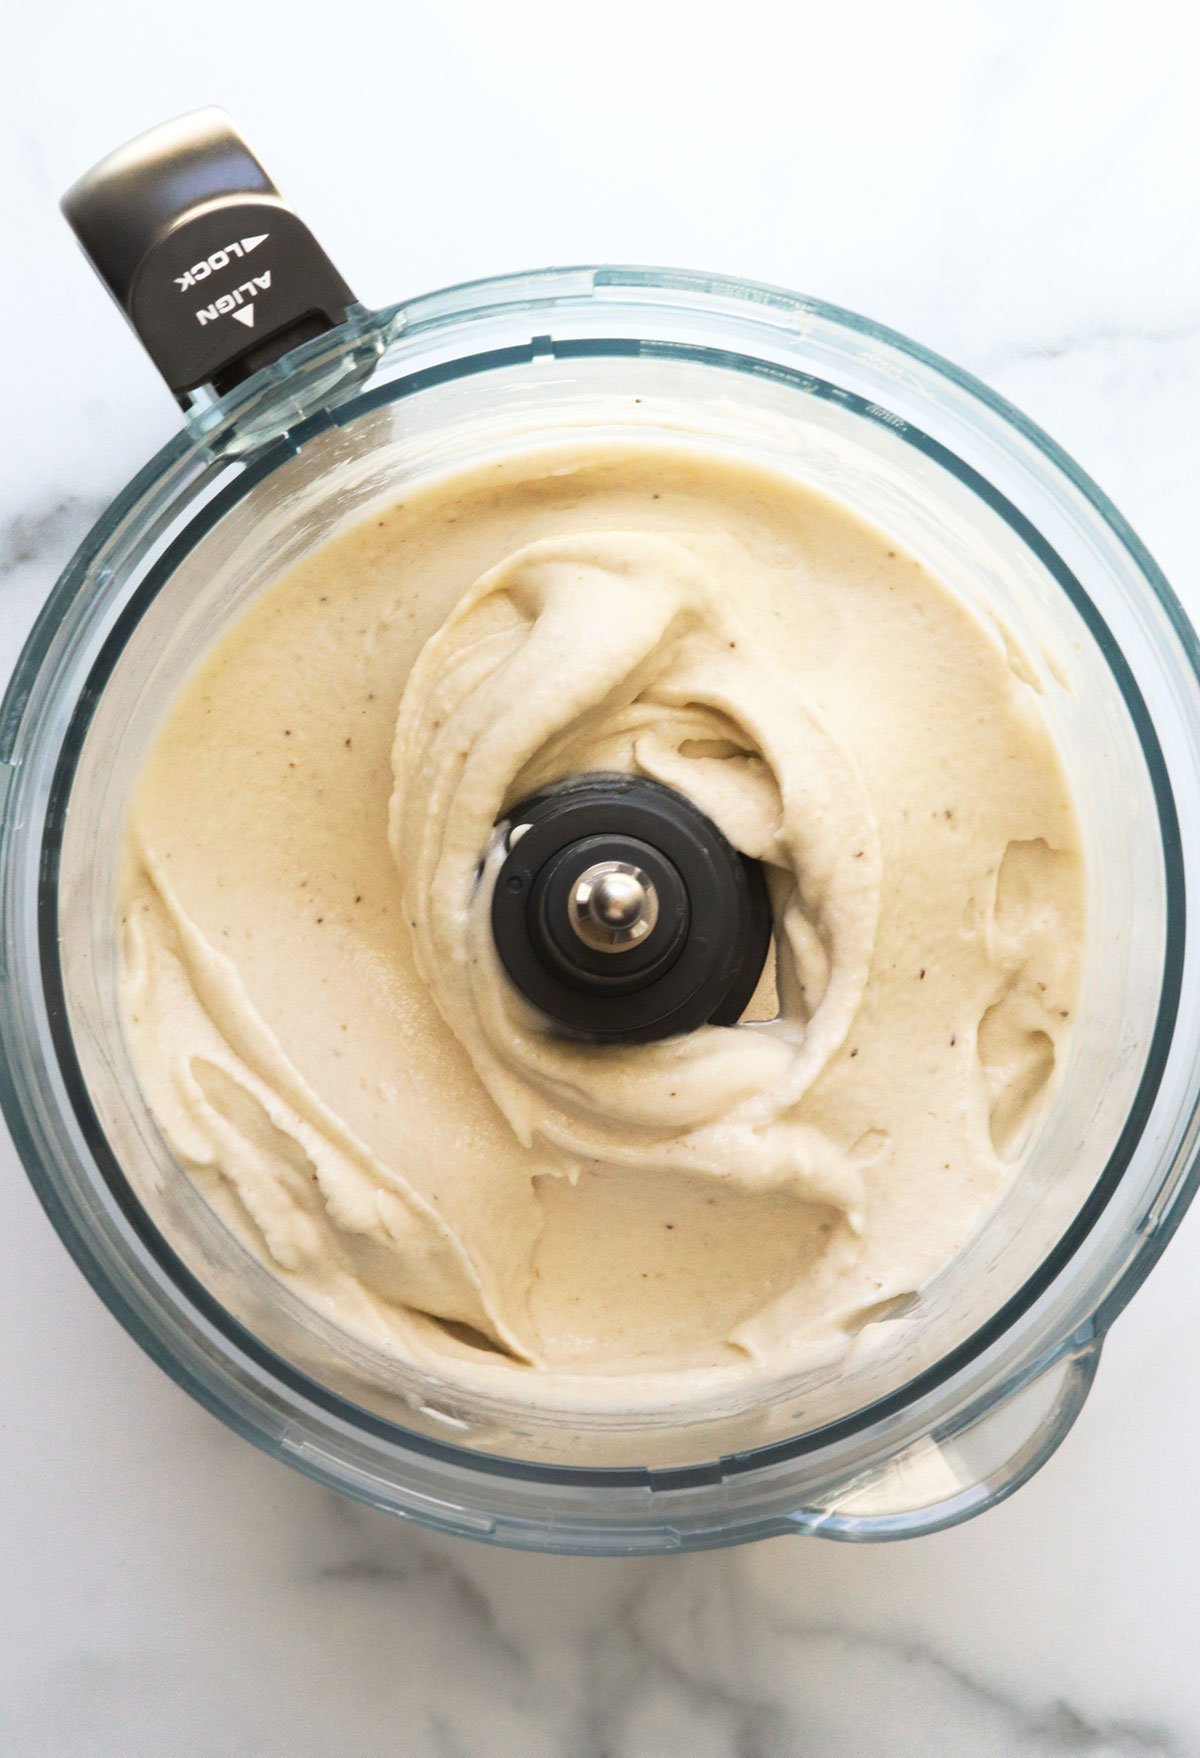 banana ice cream blended until smooth in a food processor.